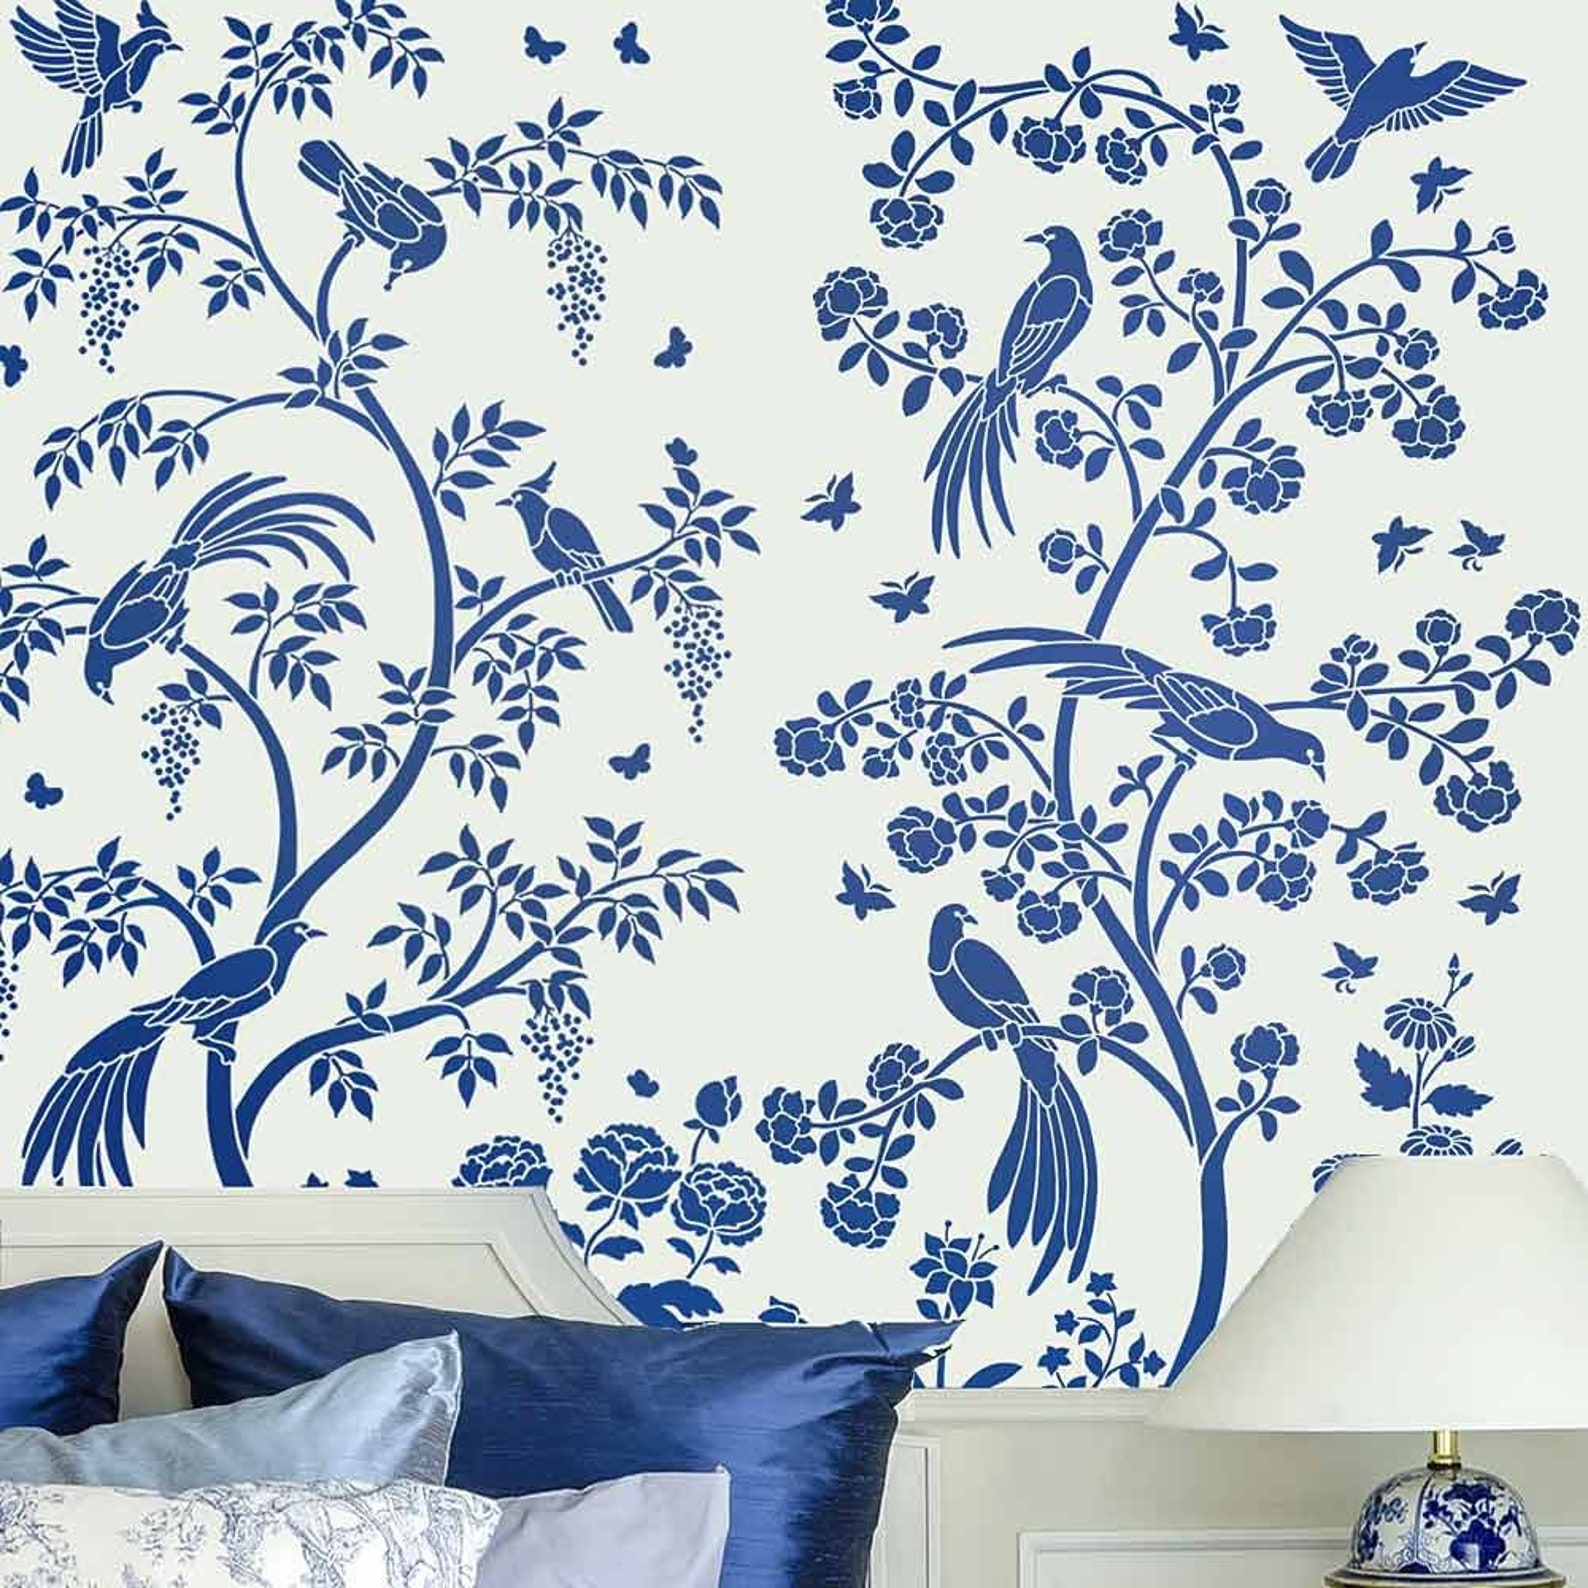 Birds and Roses Chinoiserie Wall Mural Stencil LARGE WALL | Etsy